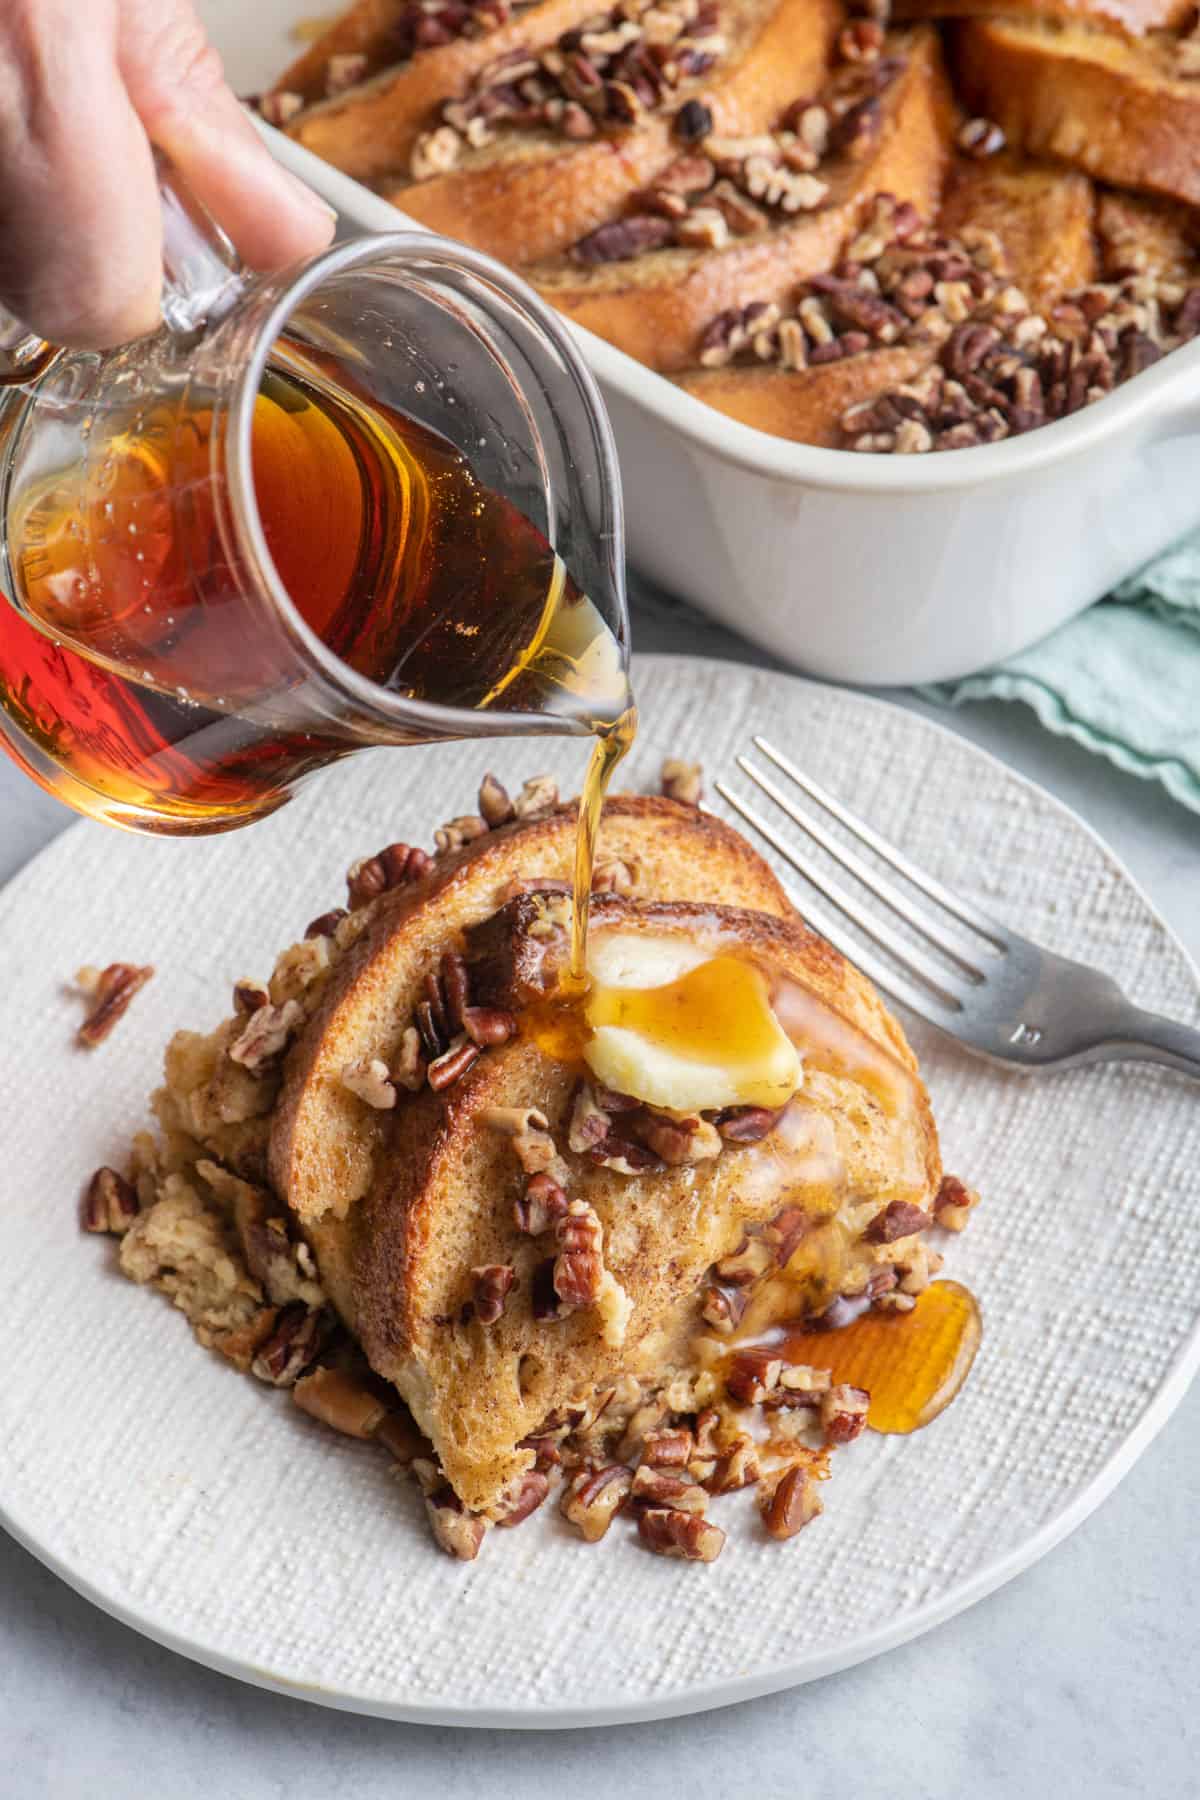 Serving of baked overnight french toast on a textured white plate with maple syrup being poured over and casserole dish of recipe in background.